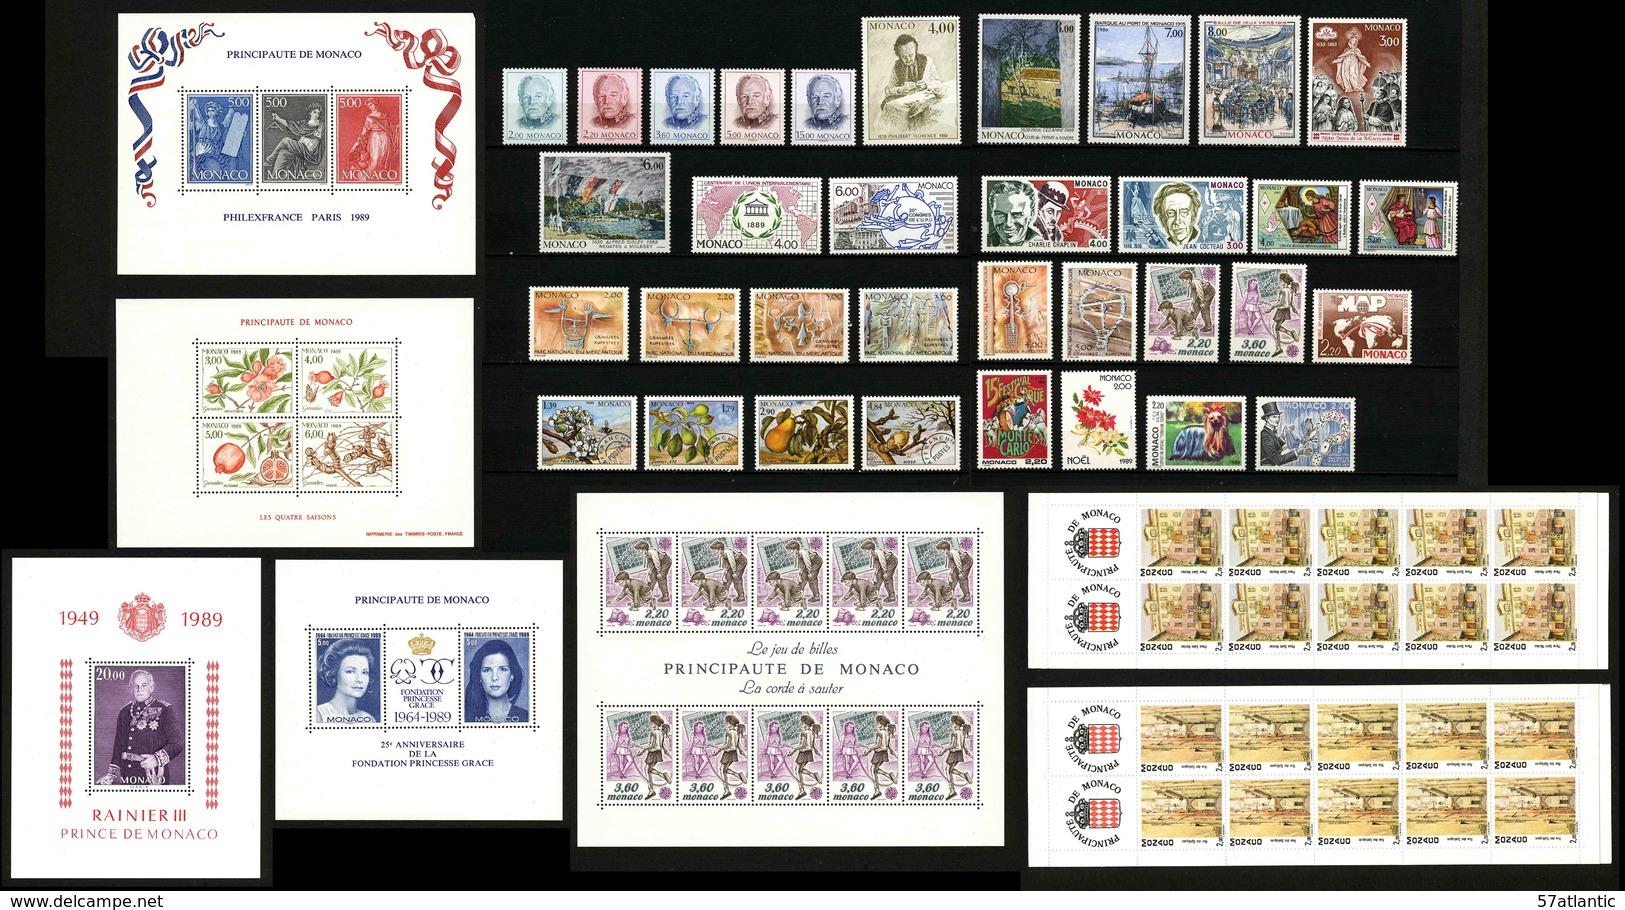 MONACO - ANNEE COMPLETE 1989 - AVEC PREOS, BLOCS, CARNETS -  34 TIMBRES NEUFS ** + 5 BLOCS NEUFS ** + 2 CARNETS ** - Full Years